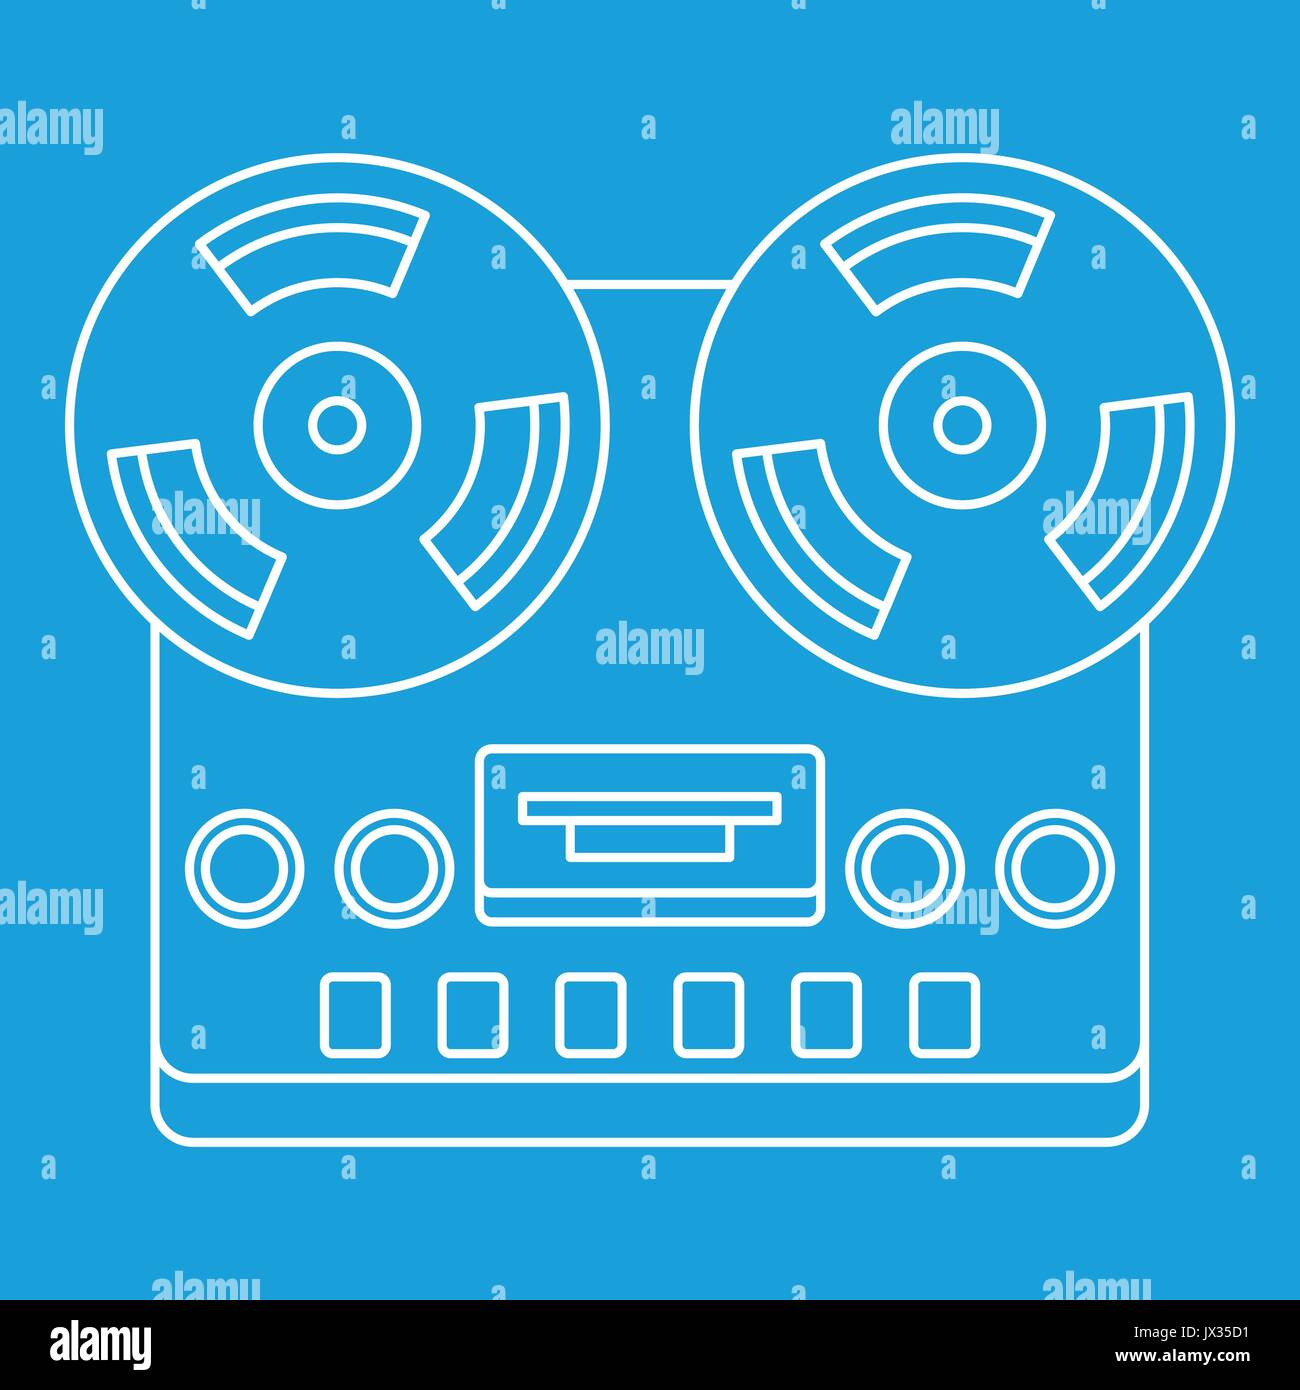 https://c8.alamy.com/comp/JX35D1/analog-stereo-open-reel-tape-deck-recorder-icon-JX35D1.jpg